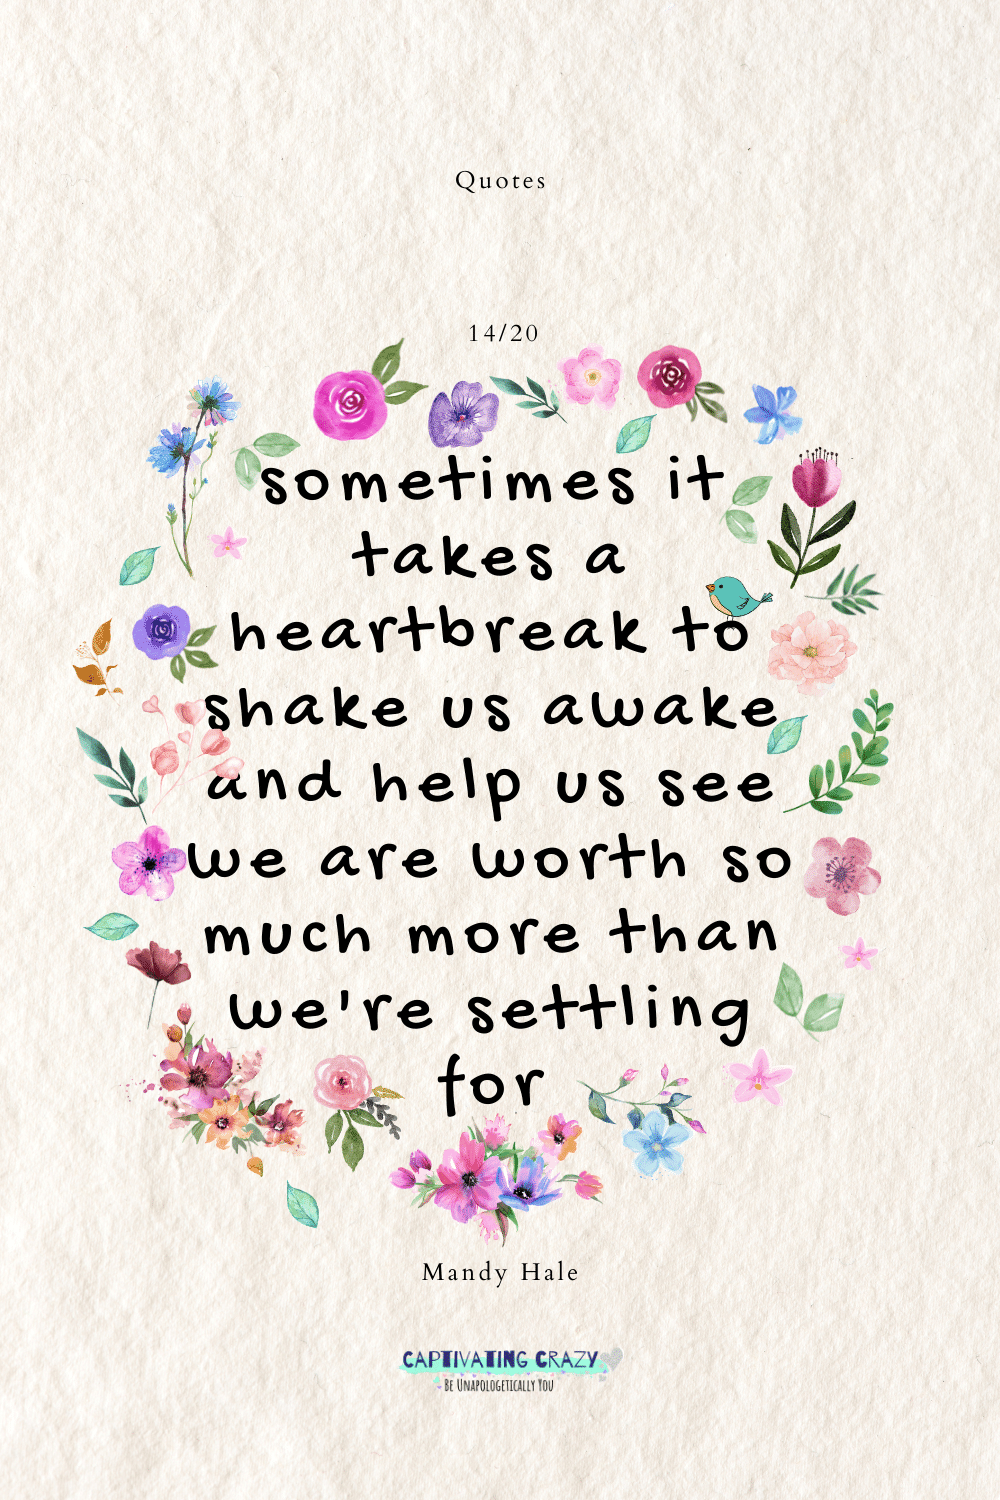 Sometimes it takes a heartbreak to shake us awake and help us see we are worth so much more than we're settling for. Mandy Hale